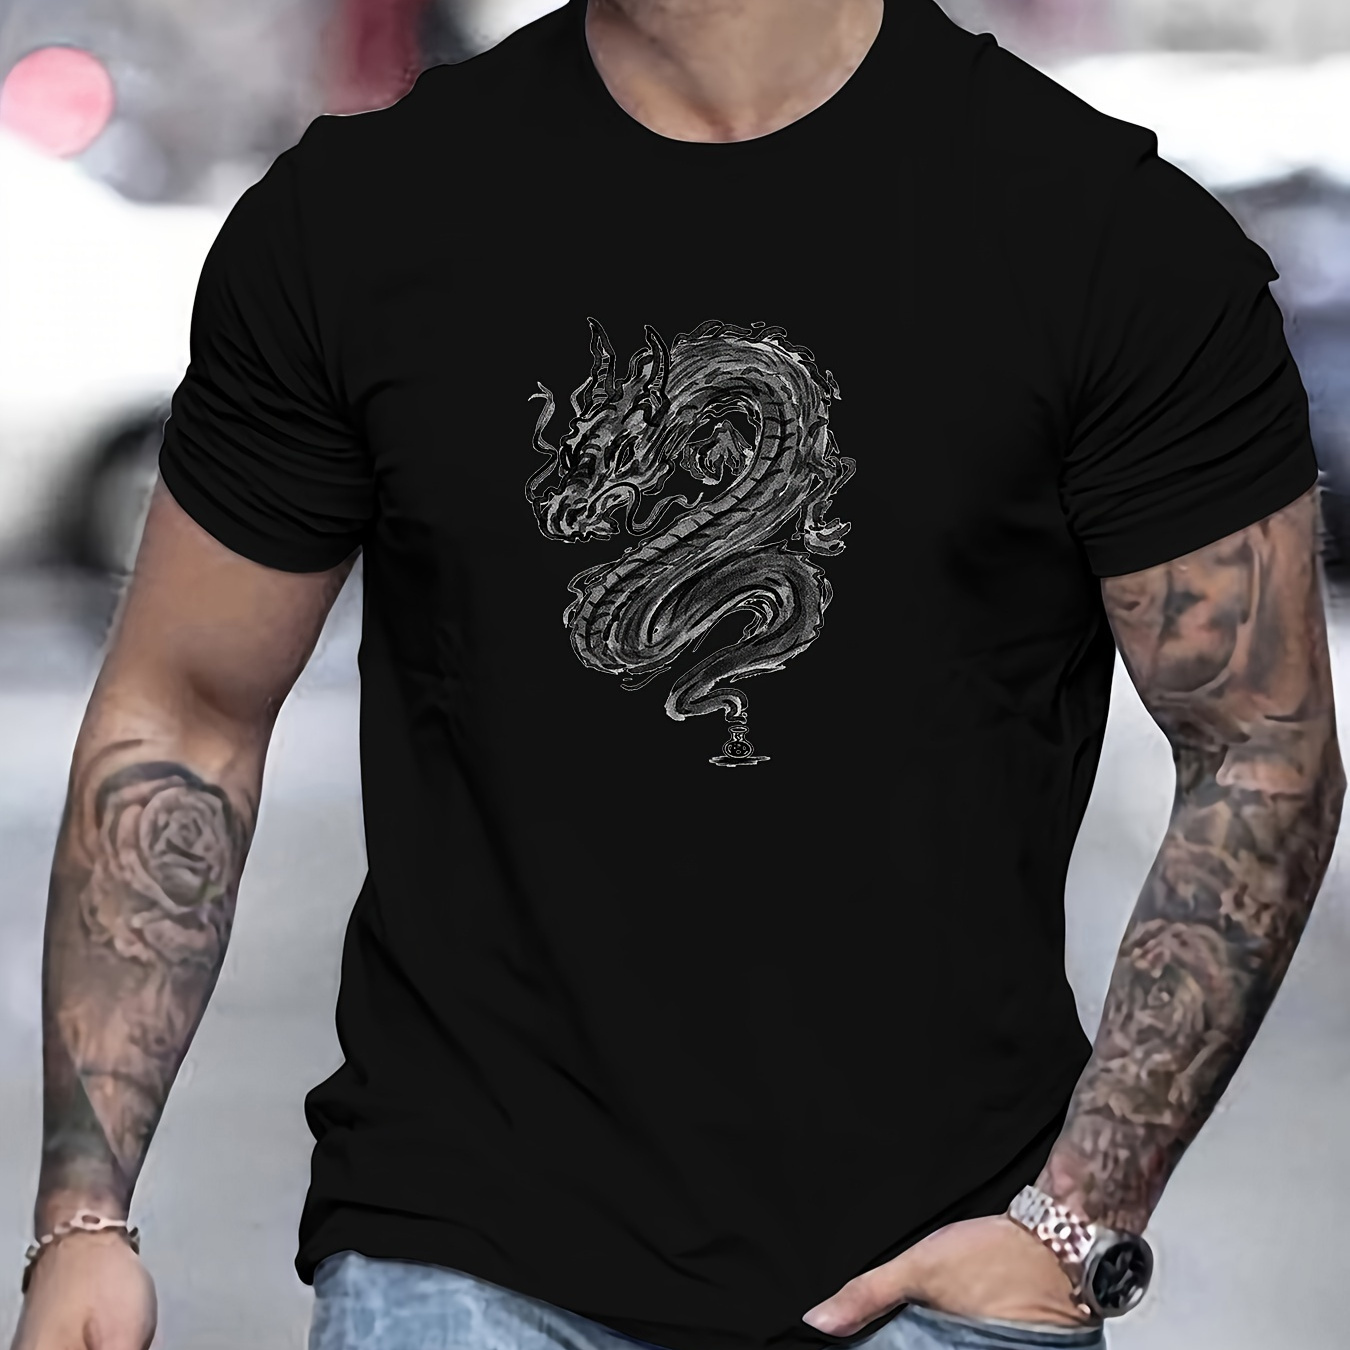 

Dragon Graphic Print, Men's Comfy Cotton T-shirt, Casual Fit Tee, Cool Top Clothing For Men For Summer For Everyday Activities